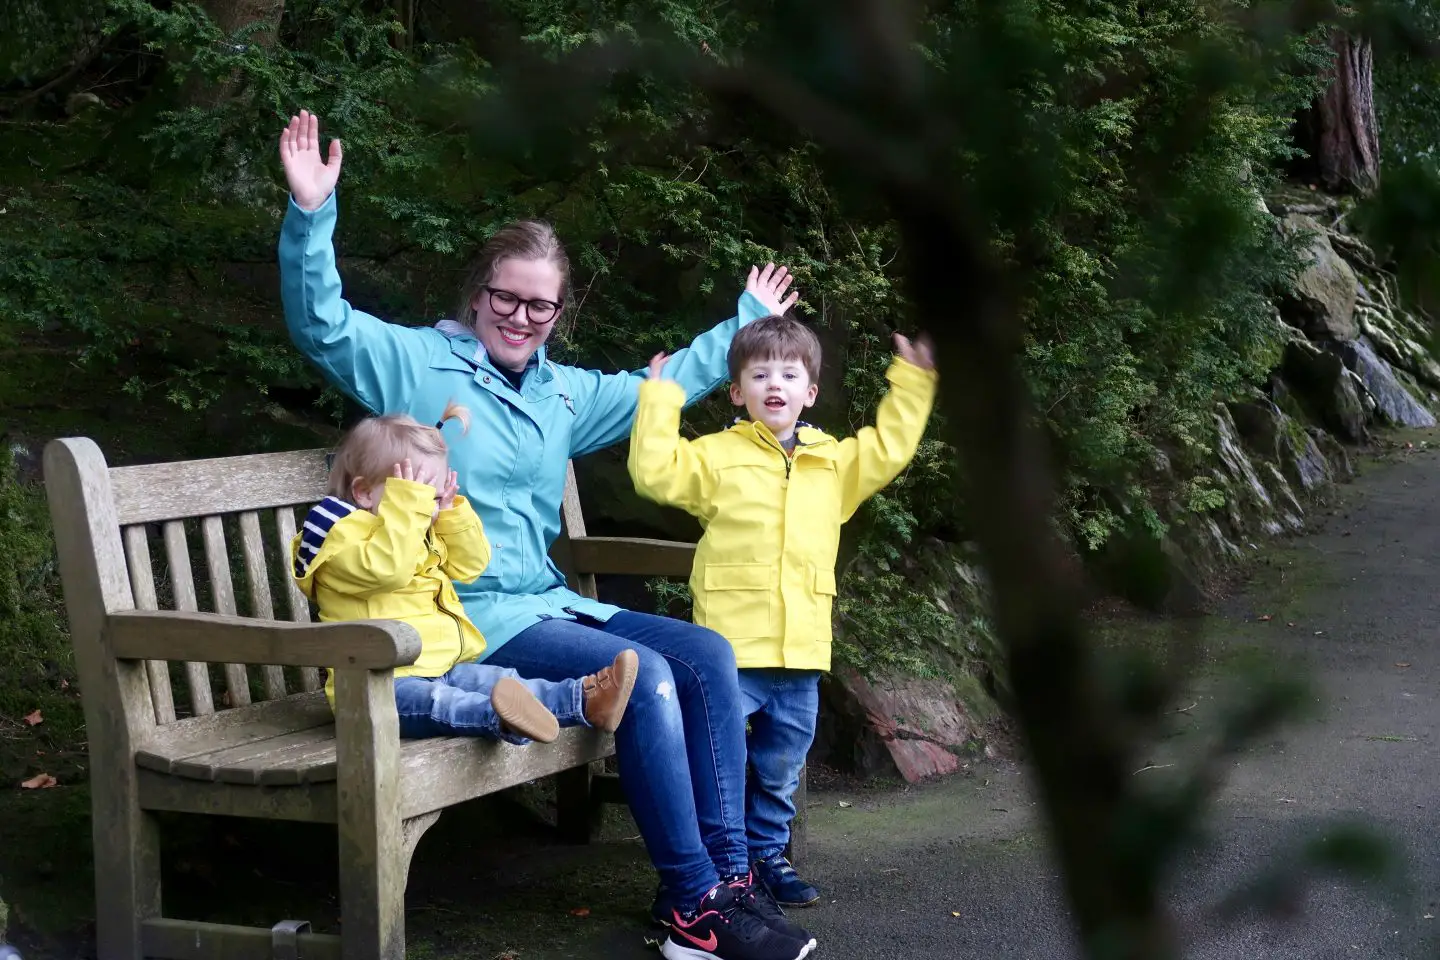 A mother and two children are on a bench in a park. The woman is wearing a teal coloured raincoat and her sons are in yellow jackets. They are throwing their hands up in celebration